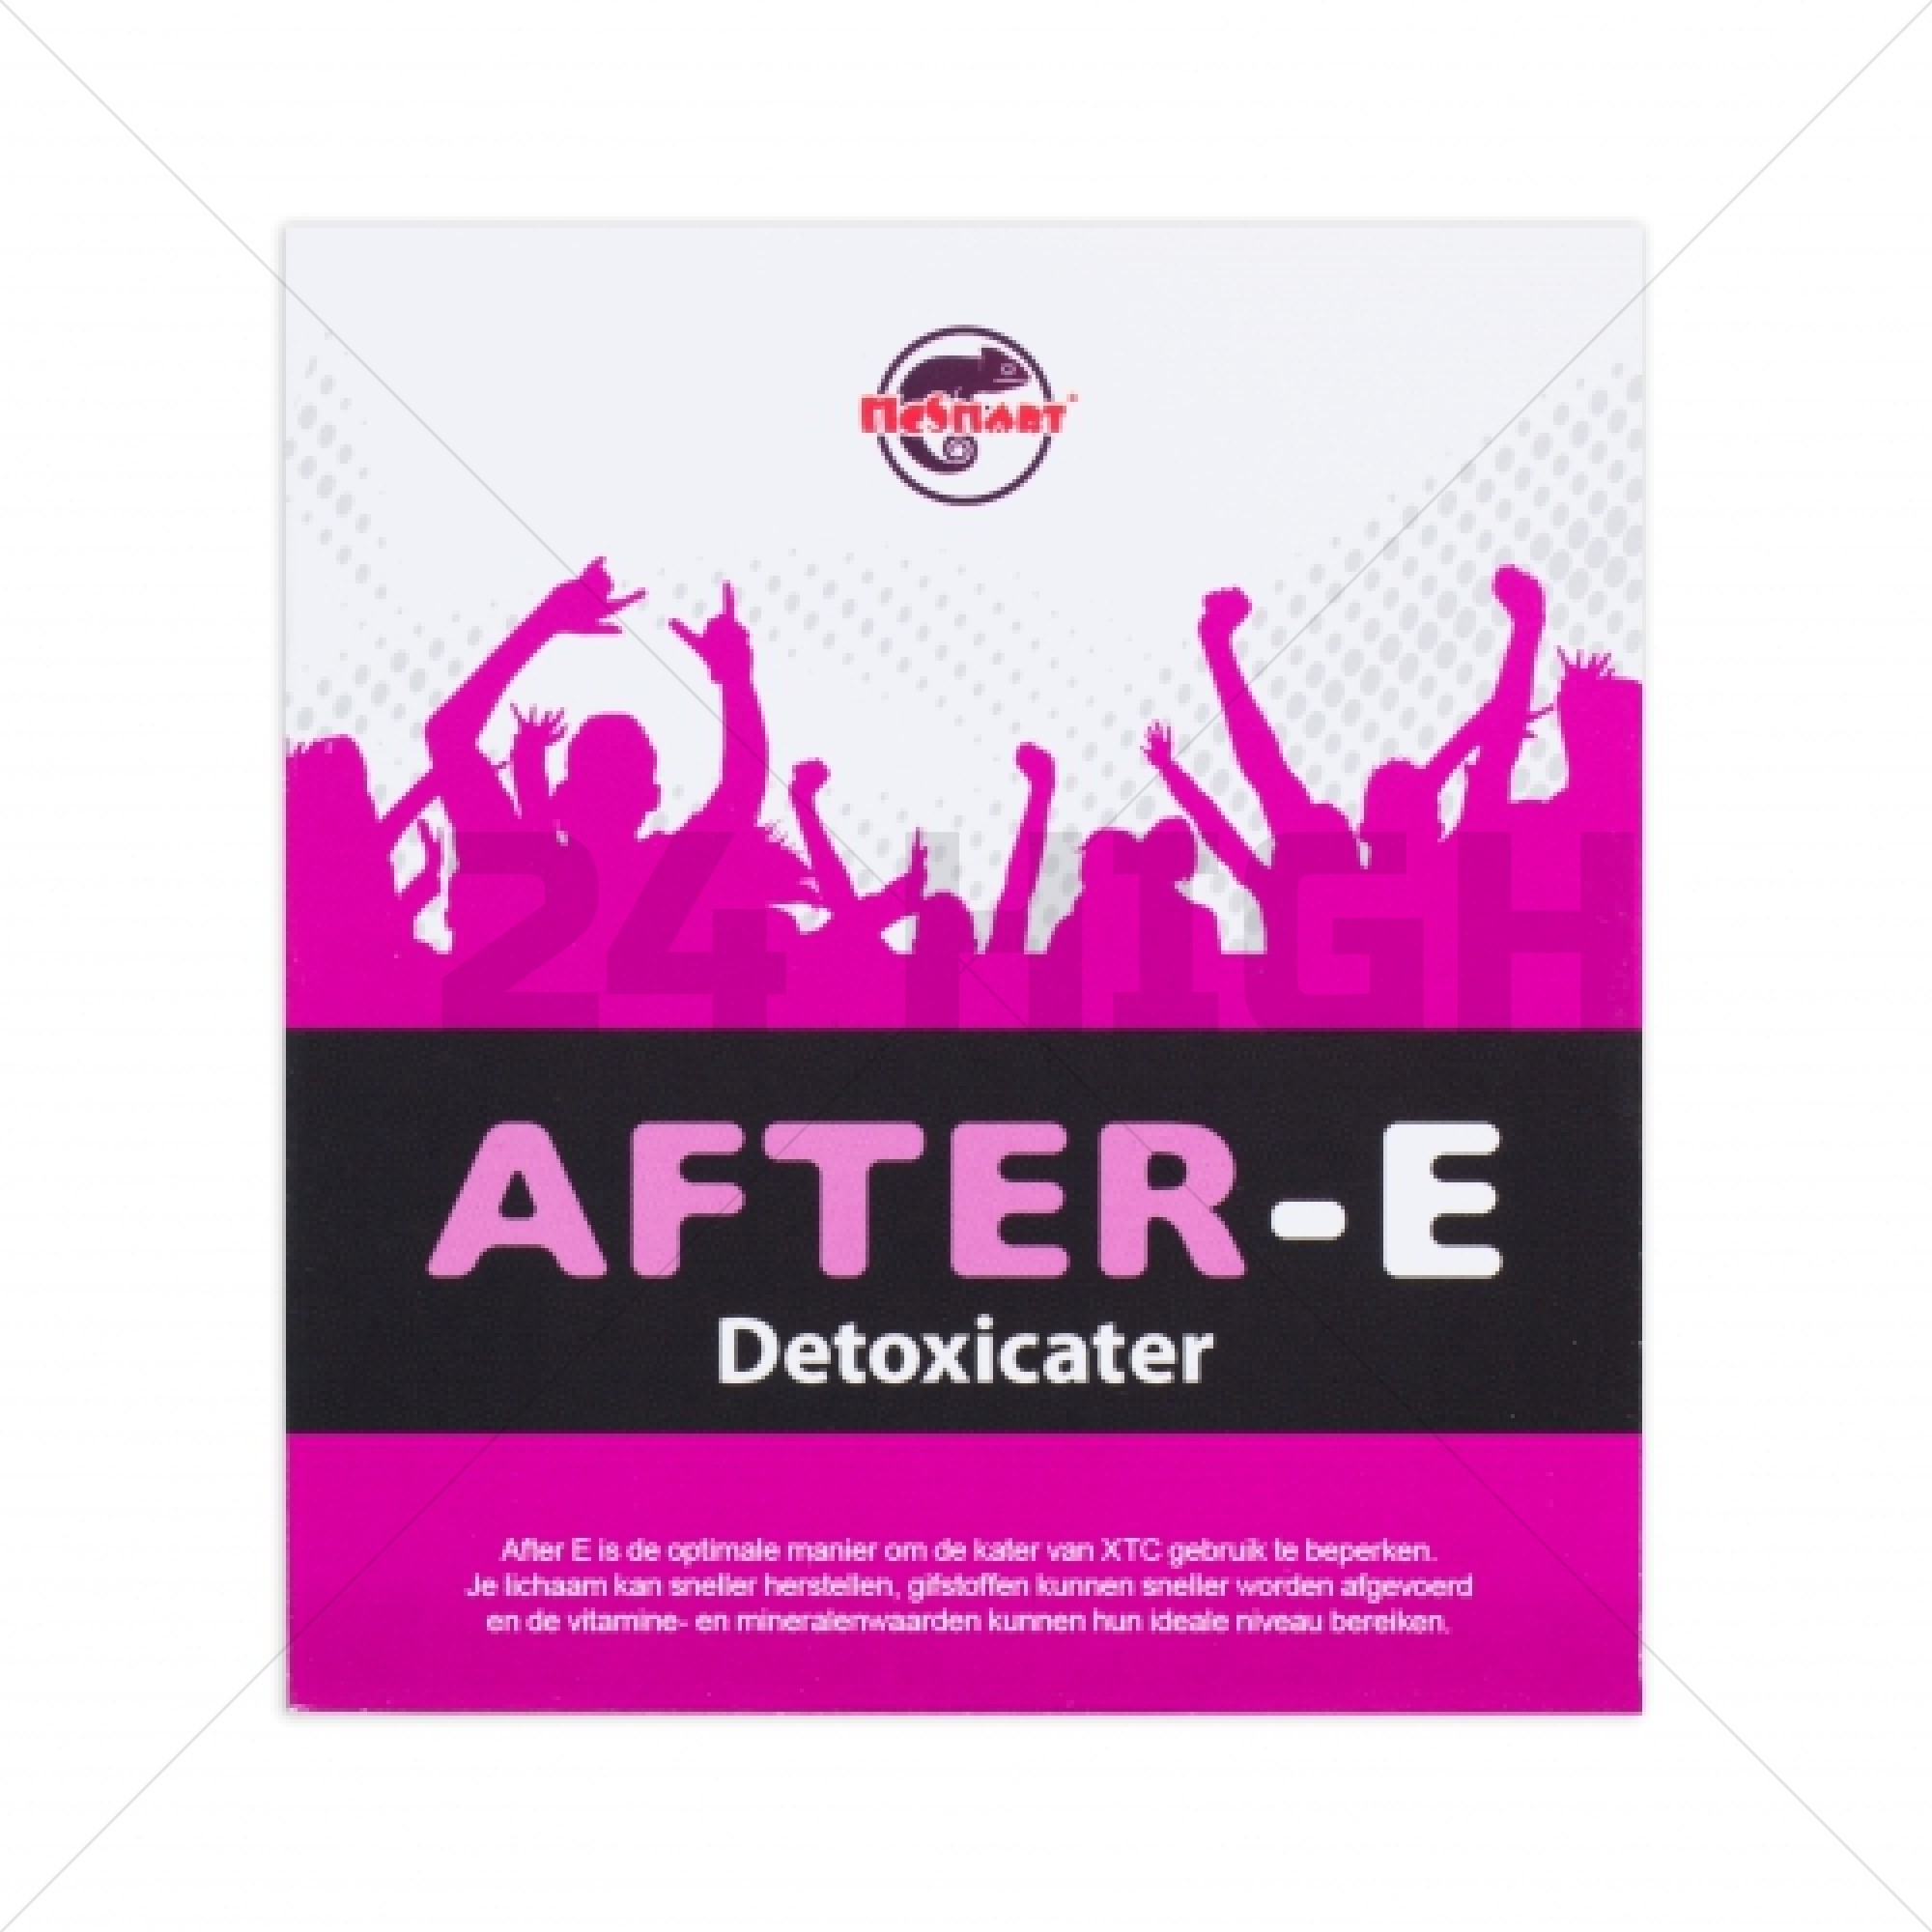 After E